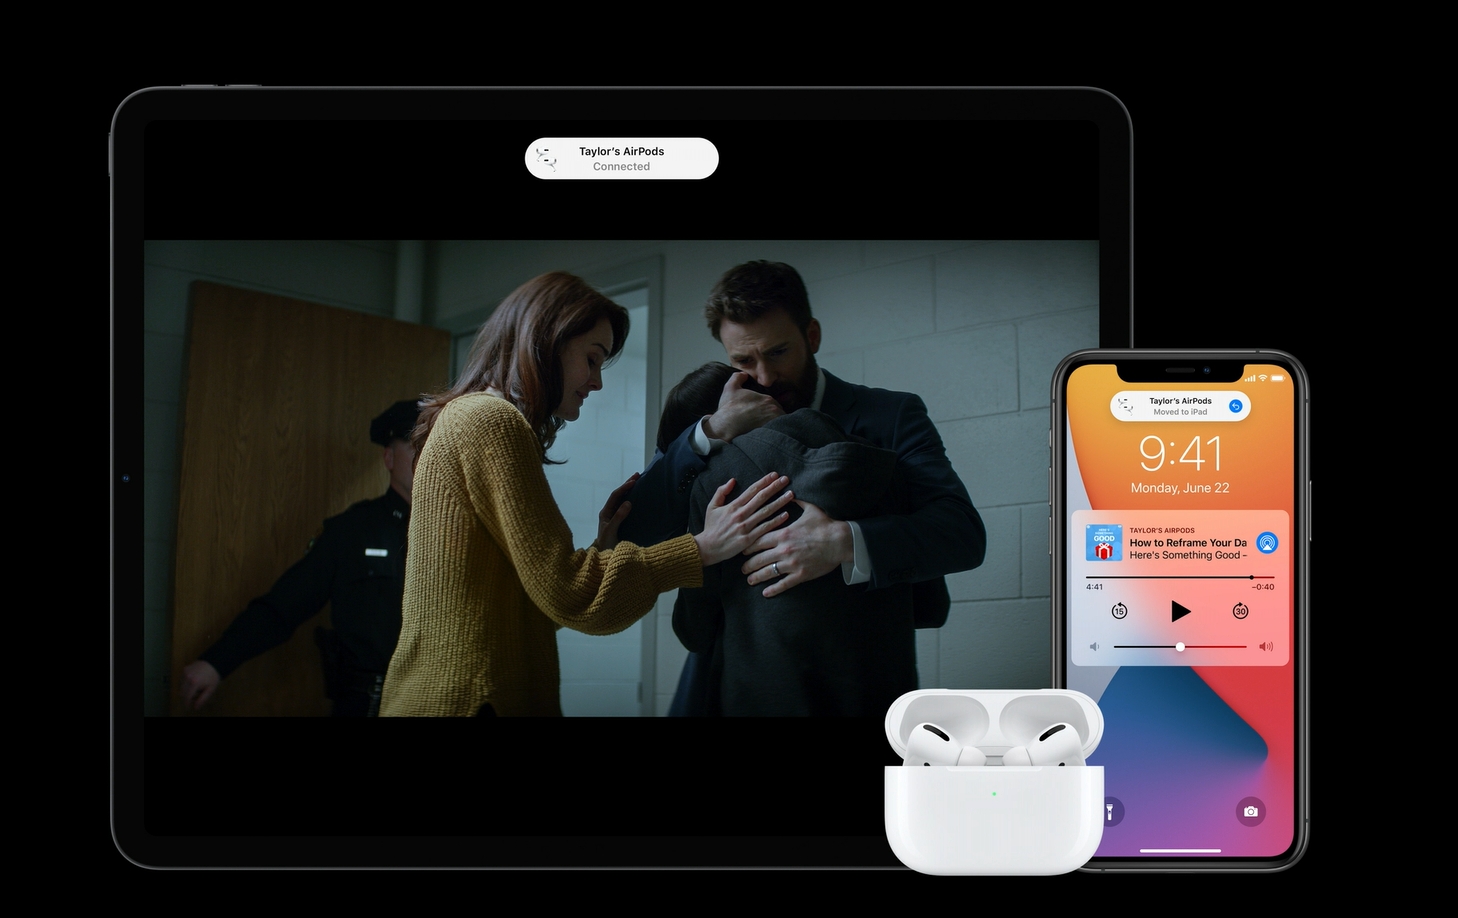 IOS 14 will make your AirPods, AirPods Pro much better